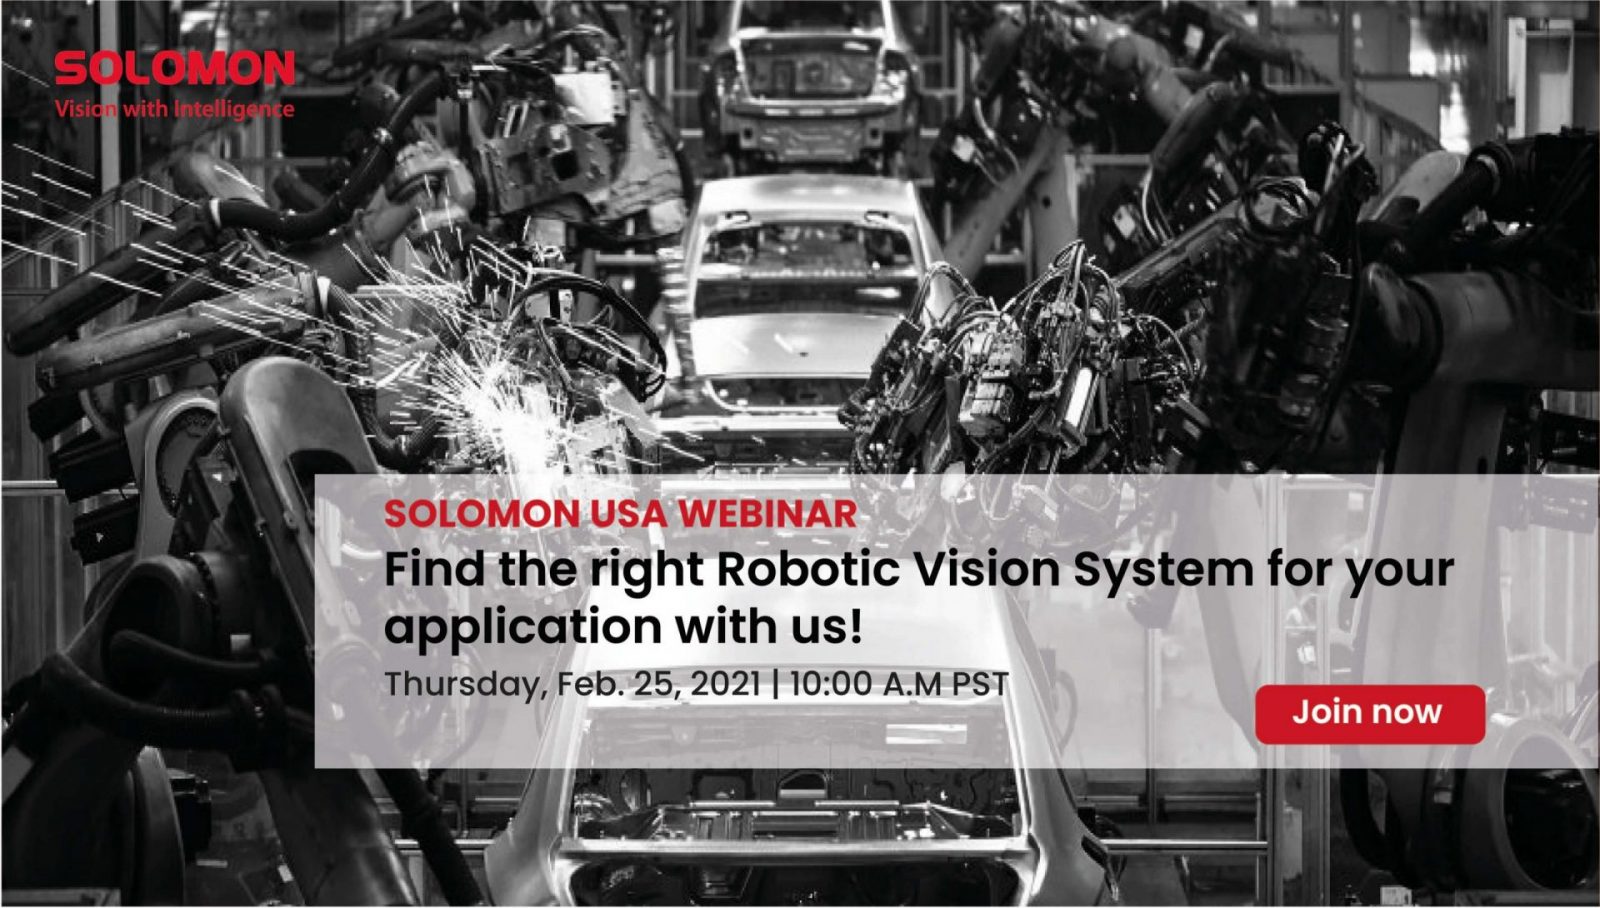 Find the Right Robotic Vision System for Your Application with Solomon